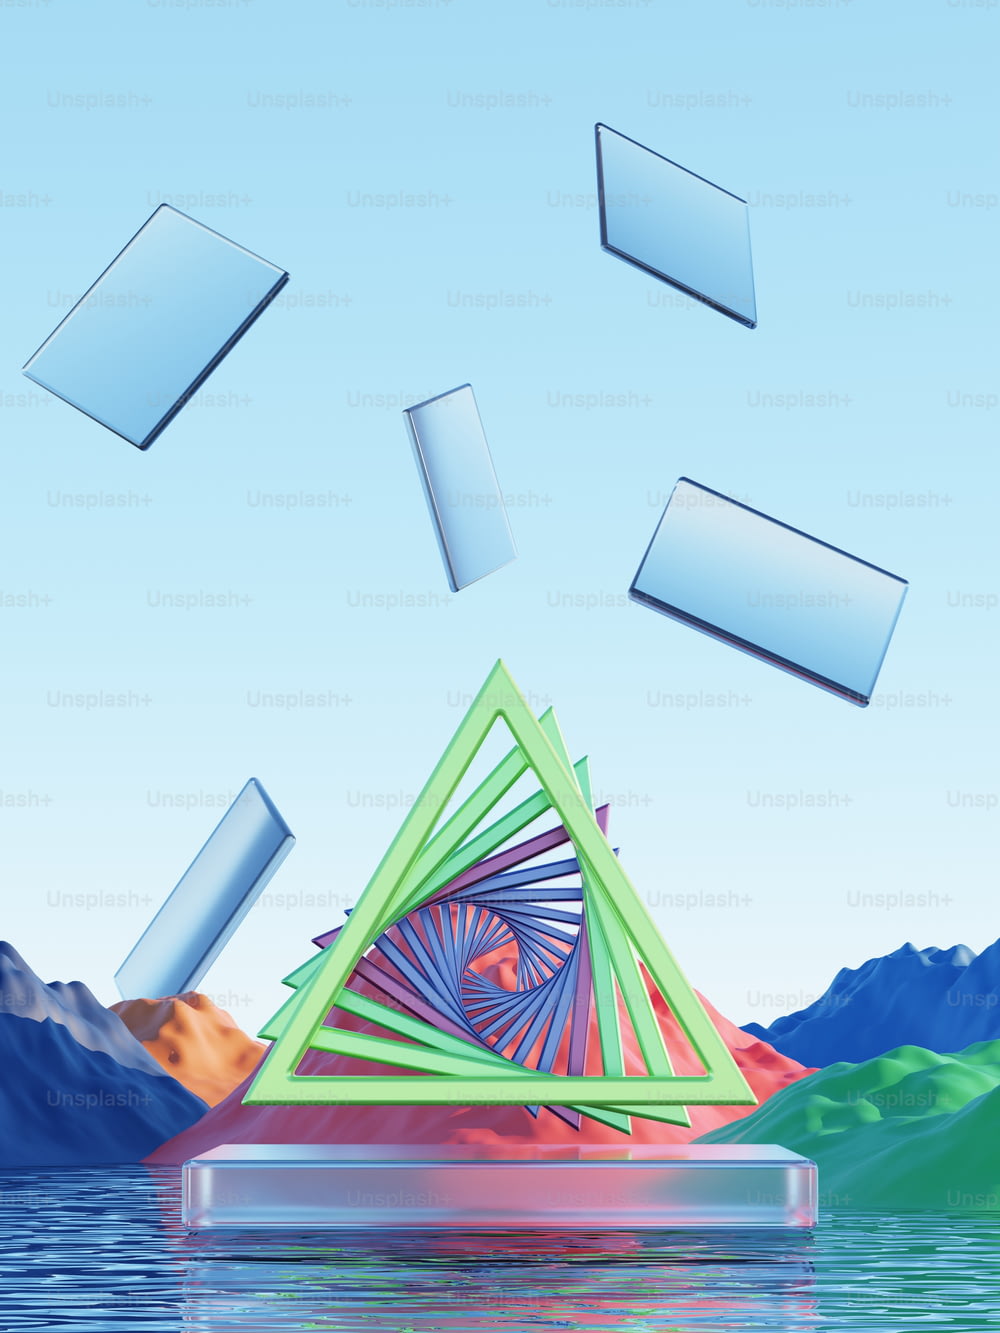 a computer generated image of a pyramid floating in the water